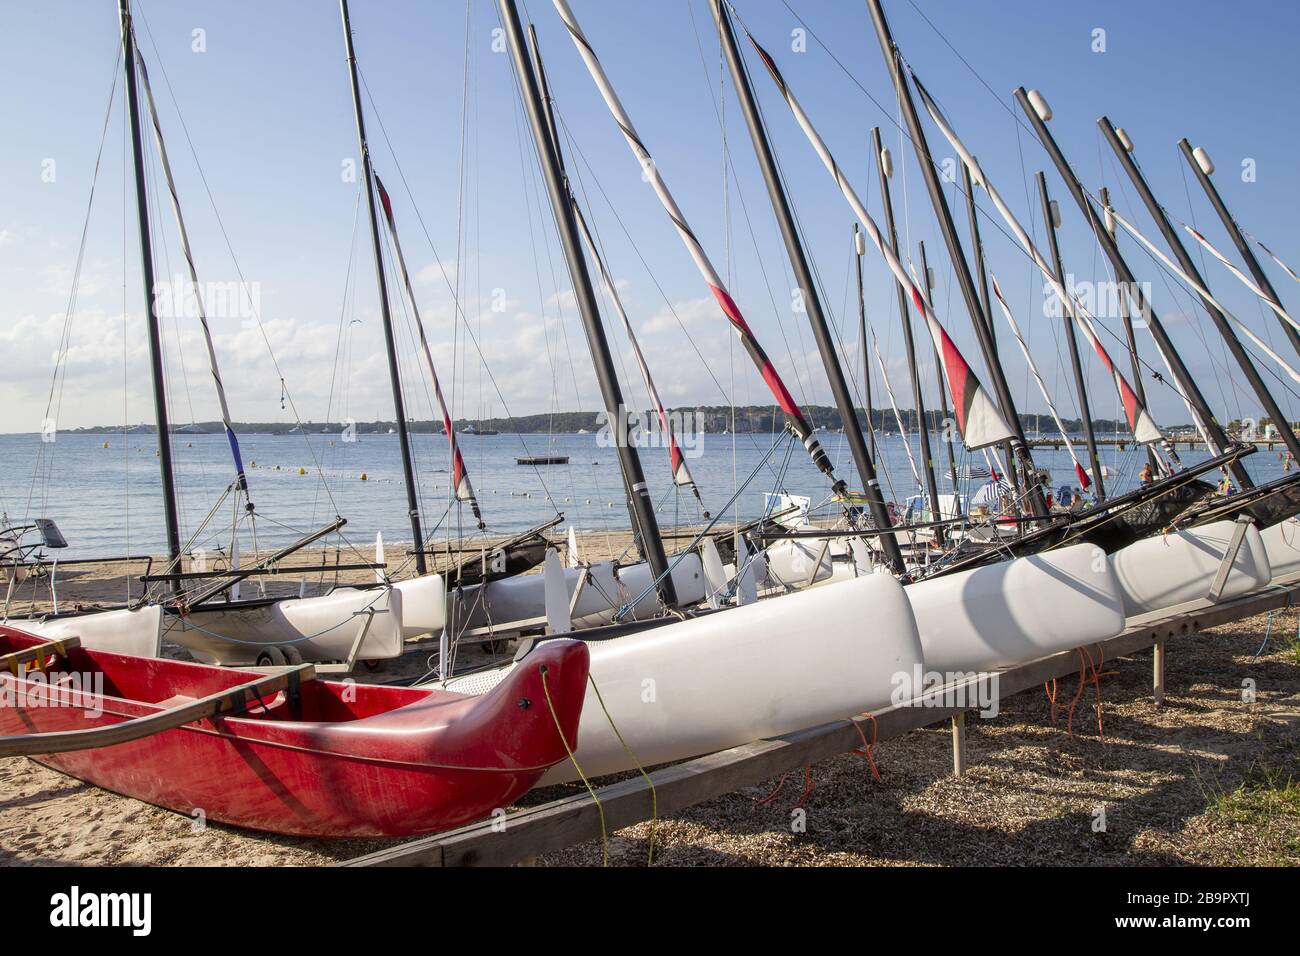 Catamarans on the beach in the french town of Cannes on the french riviera. Stock Photo